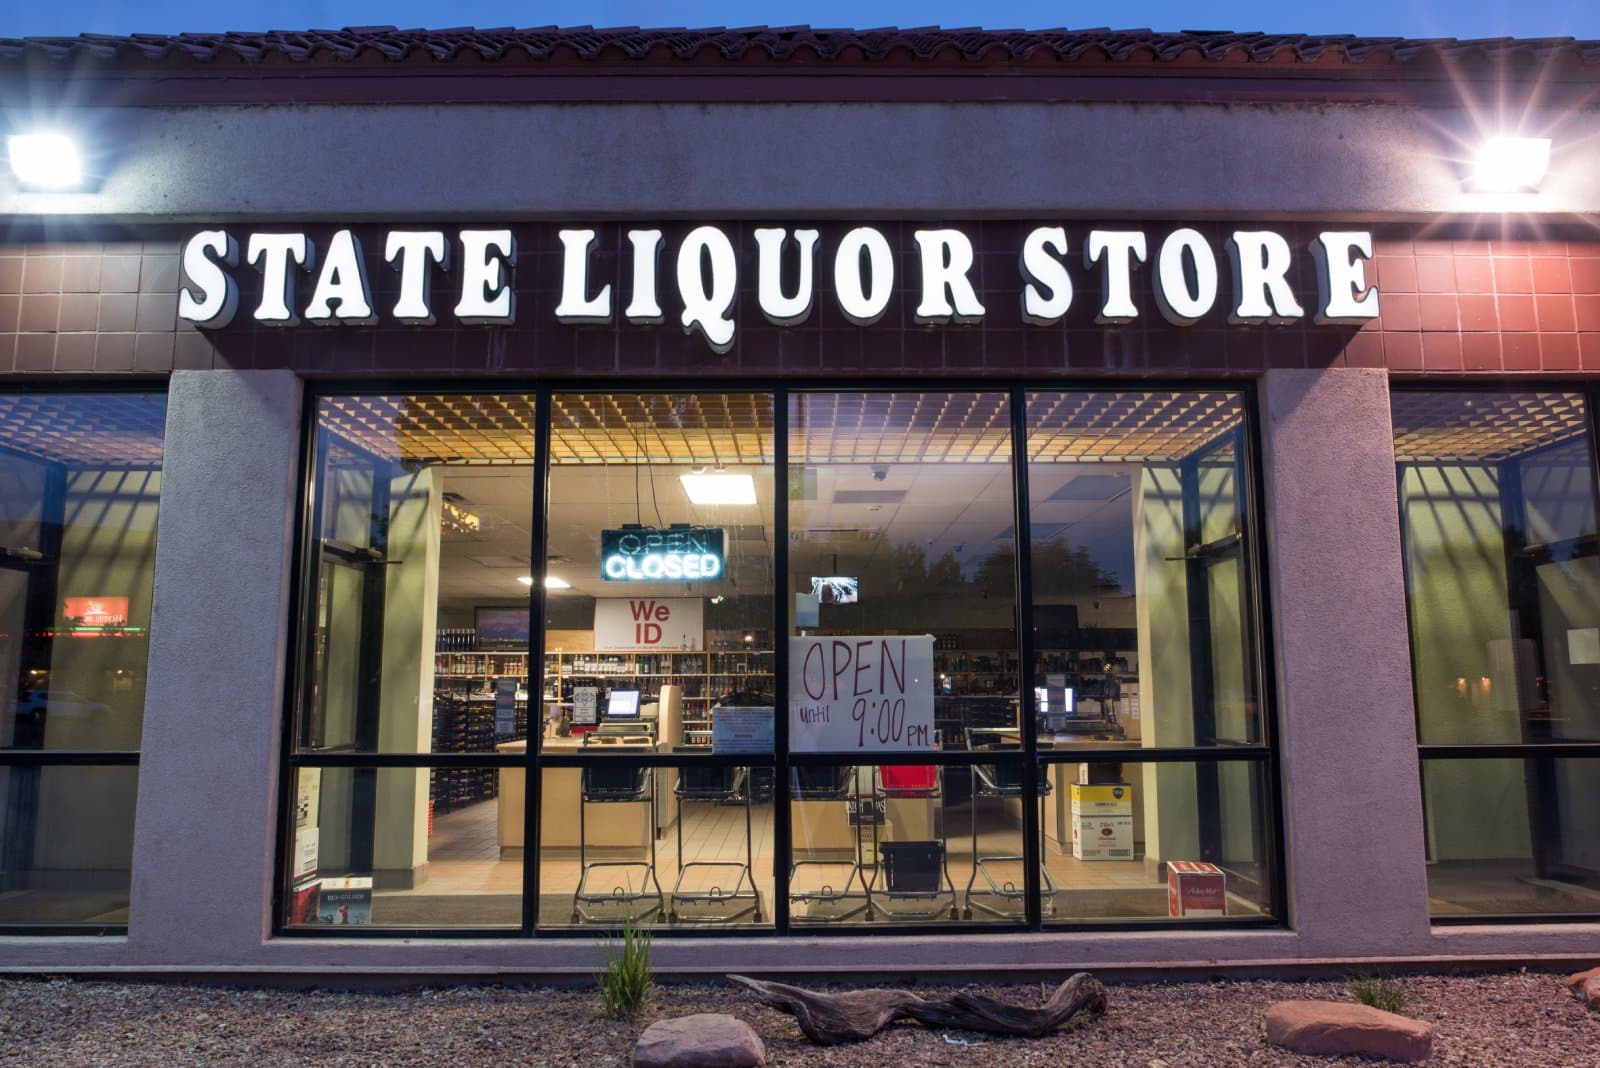 Image Credit: Shutterstock / Gorodenkoff <p><span>Buying booze in Pennsylvania is a trip back in time. State-run liquor stores with limited hours make grabbing a drink more of a mission than a convenience.</span></p>